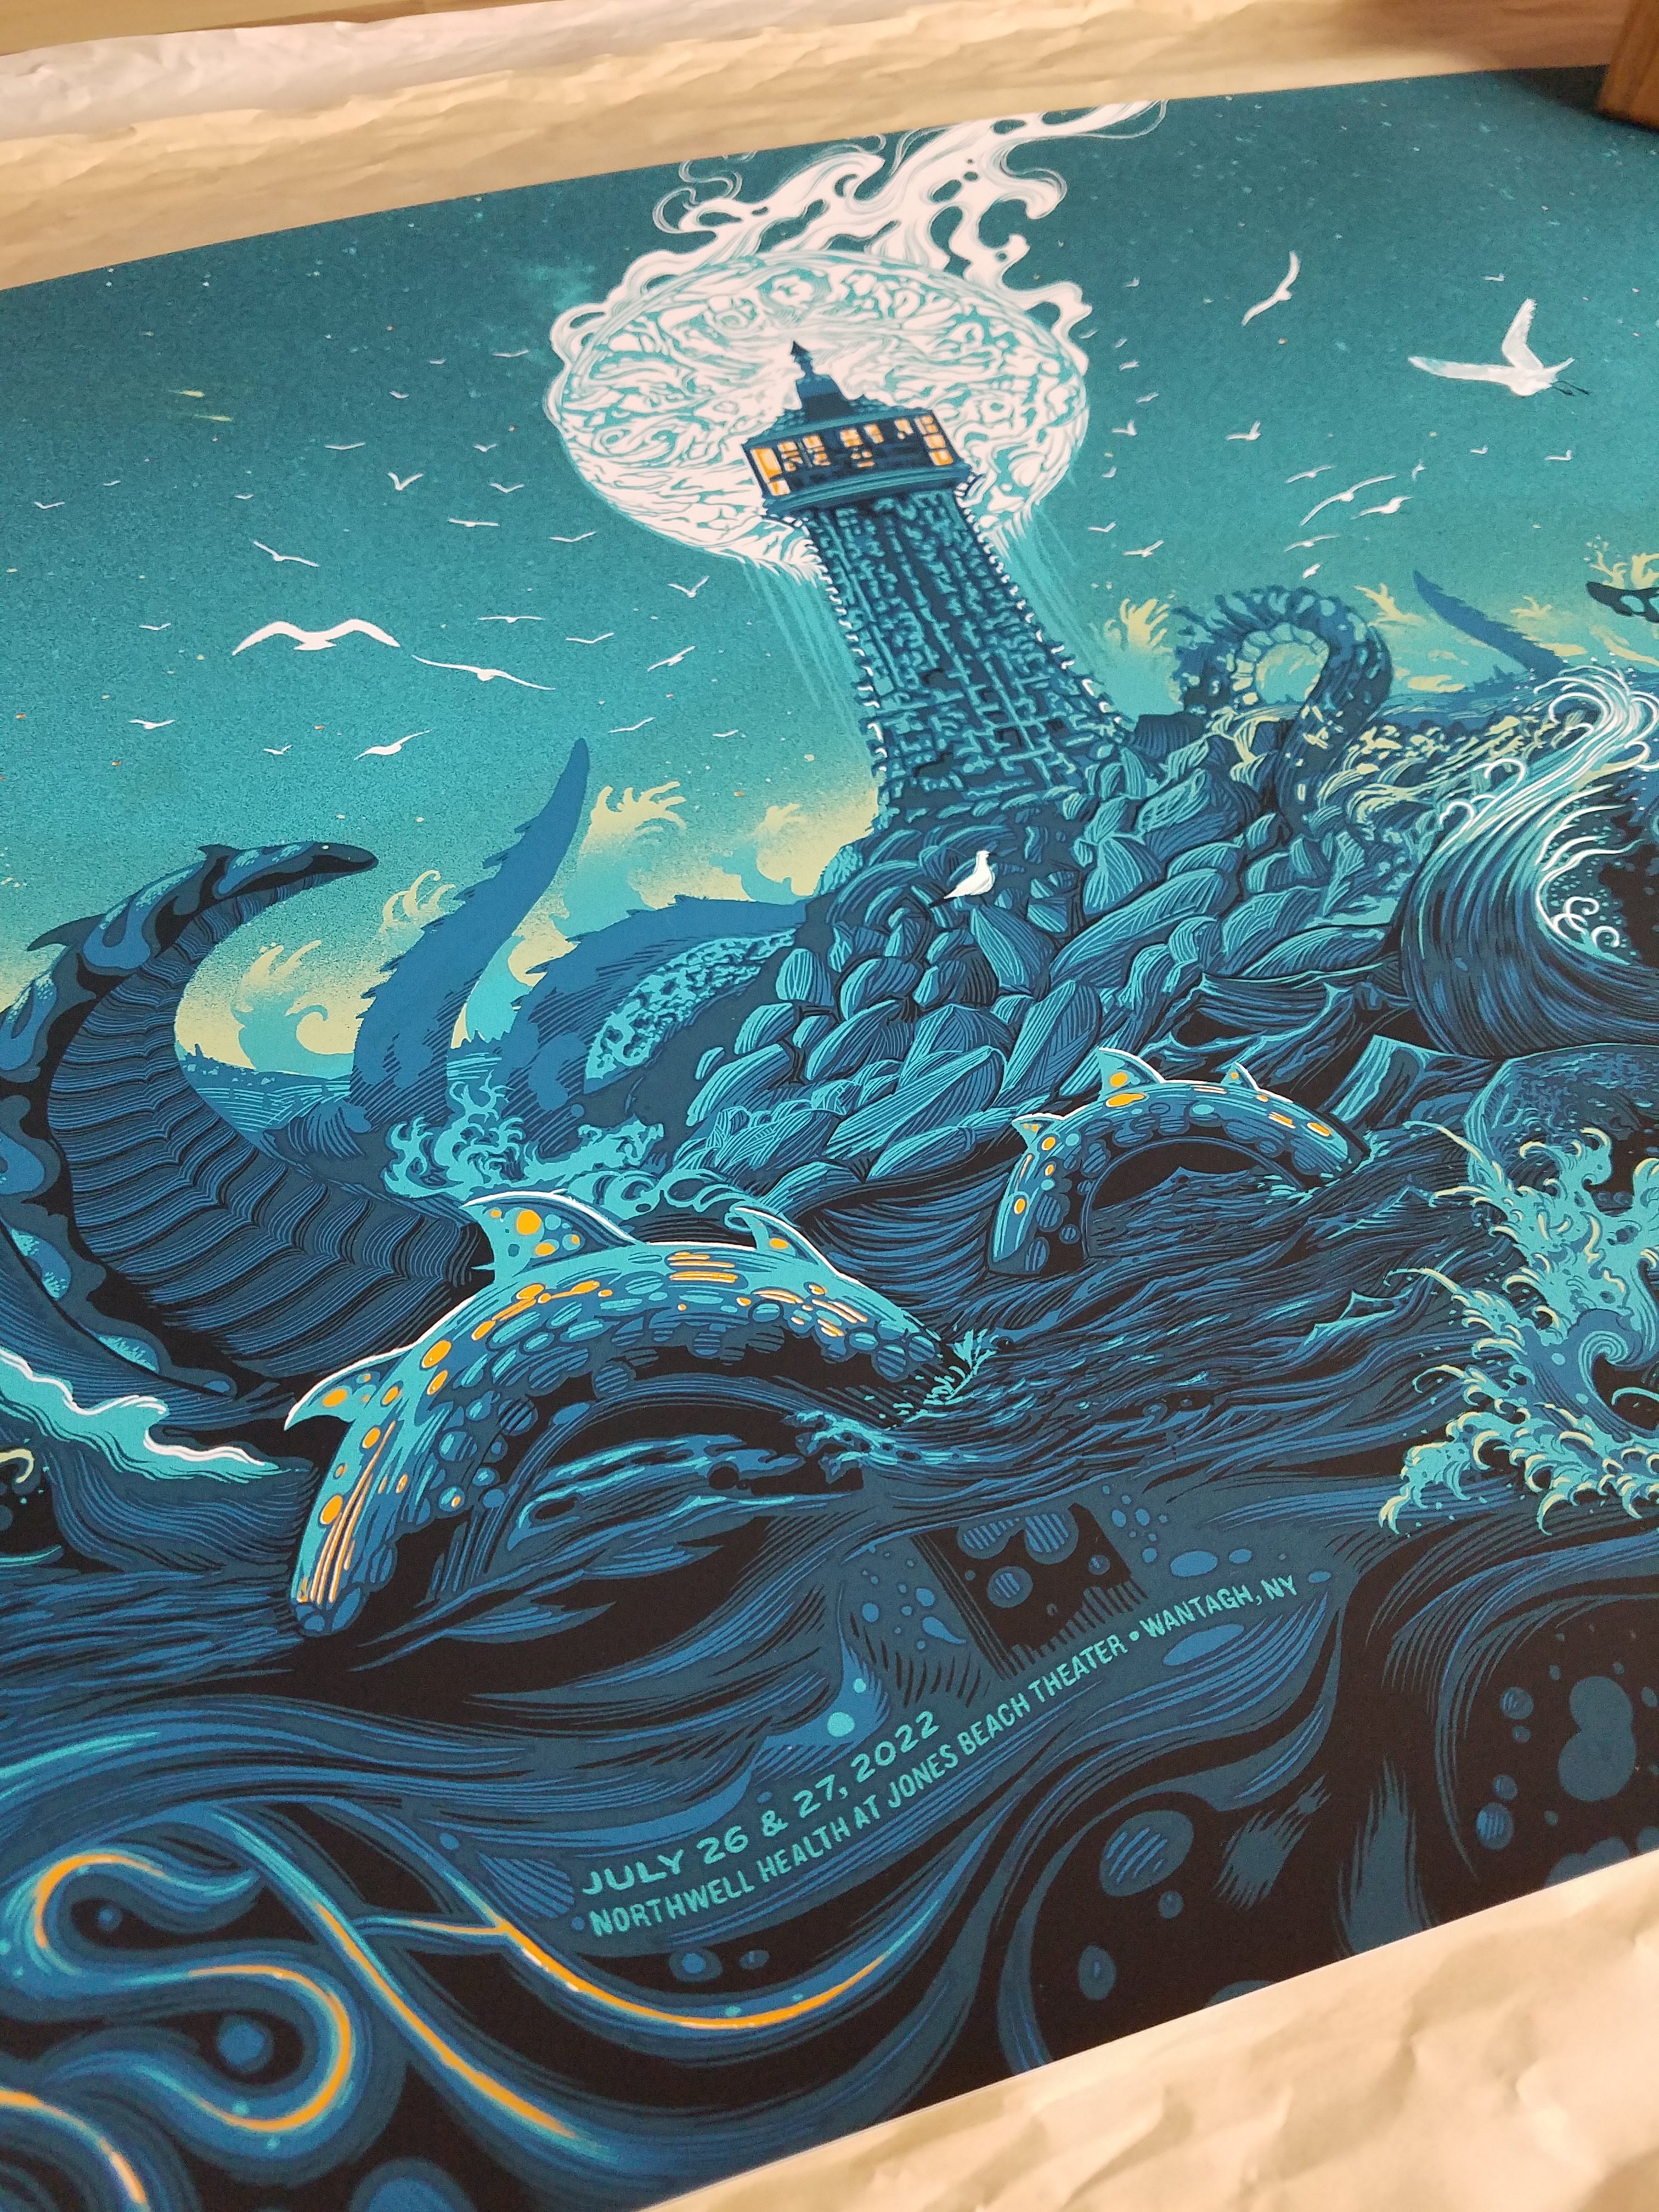 Title: Phish Jones Beach Poster - 2022  Artist: Paul Kreizenbeck  Edition:   x x/150  Type:  Screen Print  Size: 18" x 24"  Notes:  Print is stored flat in very good condition.  7 color print, signed and numbered by the artist.  Following purchase, print will be rolled in kraft paper and shipped in a sturdy cardboard tube which is padded on both ends with bubble wrap.